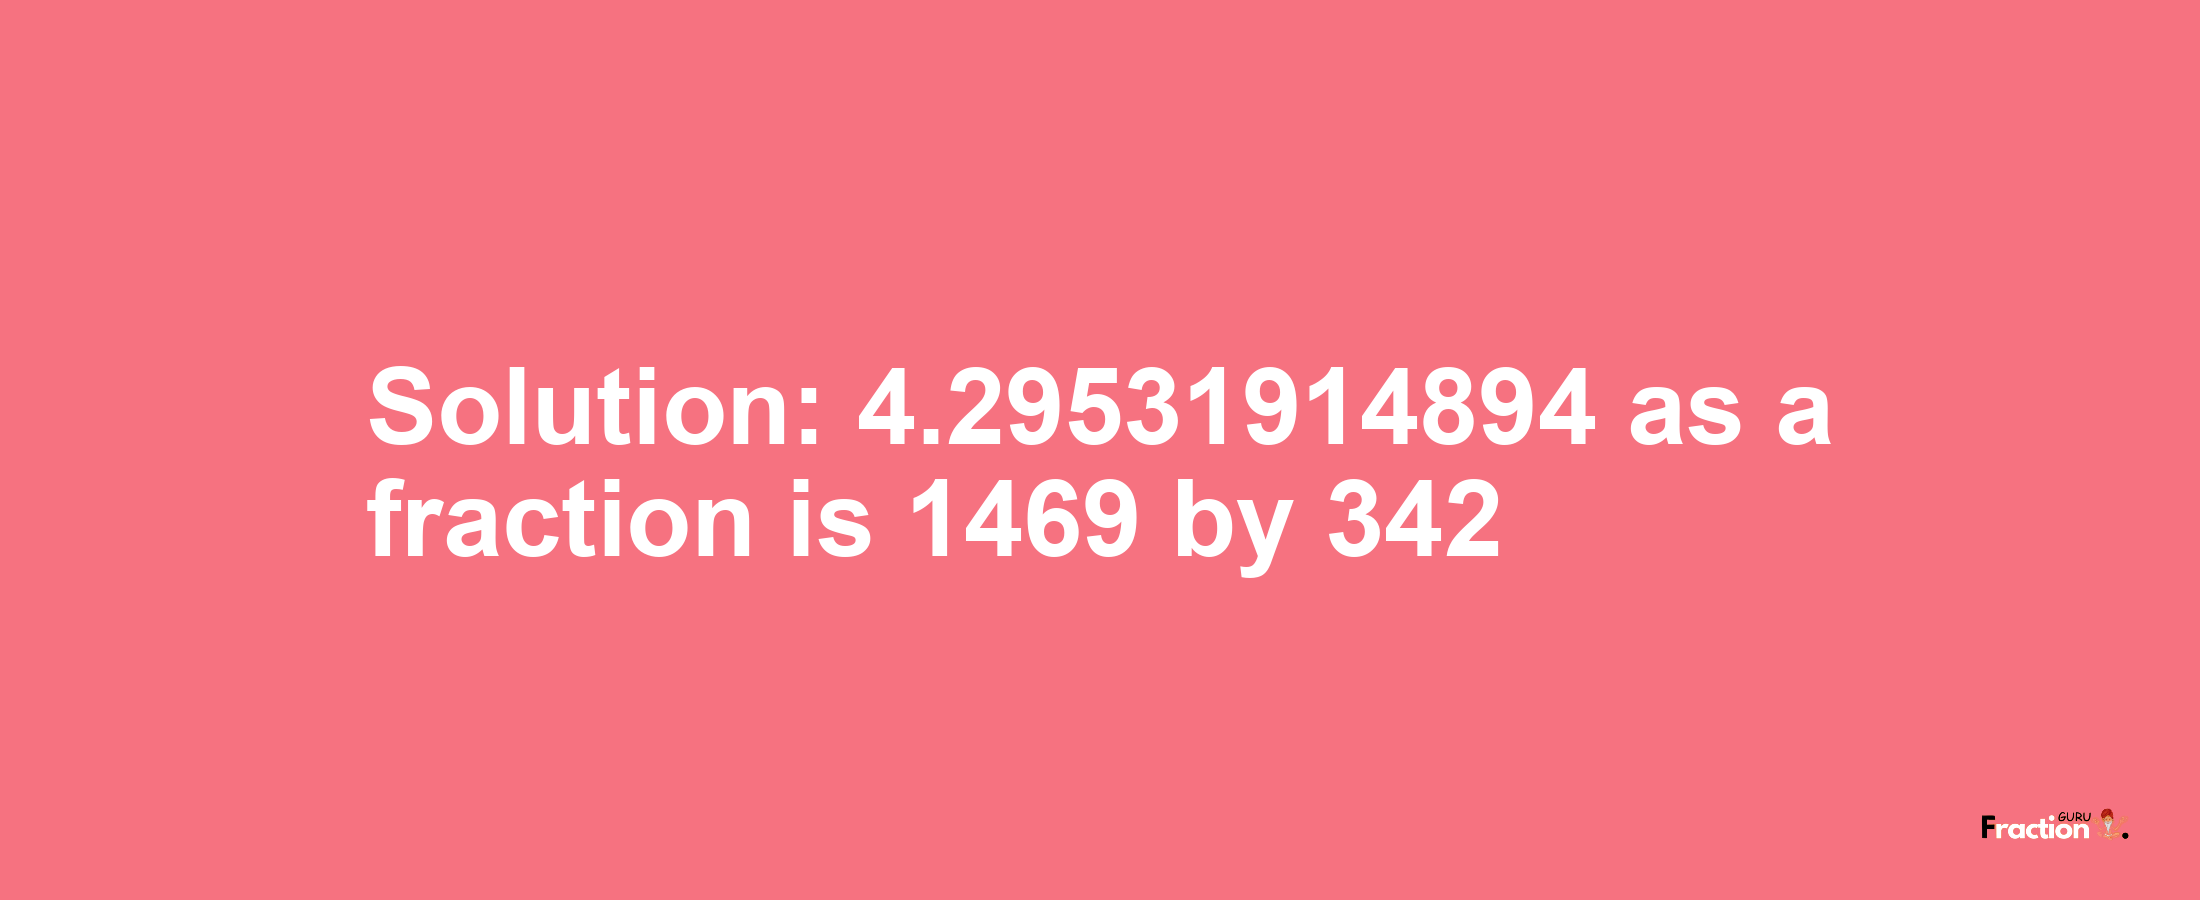 Solution:4.29531914894 as a fraction is 1469/342